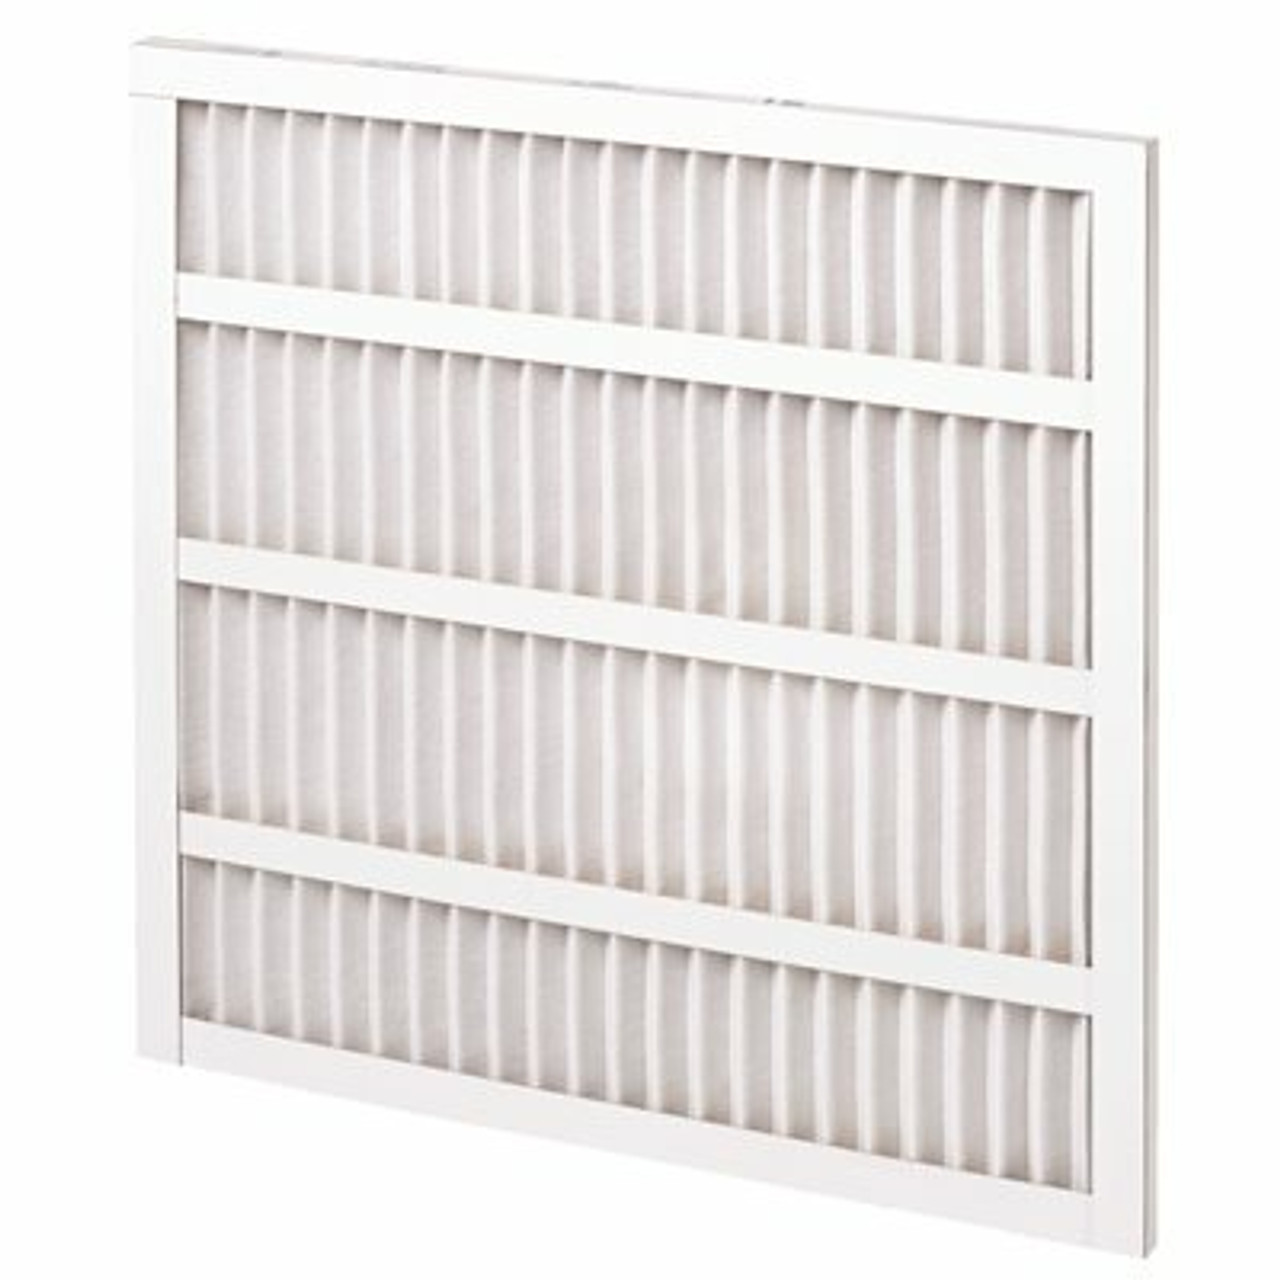 25 In. X 18 In. X 1 Pleated Air Filter Standard Capacity Self-Supported MERV 8 (12-Case)